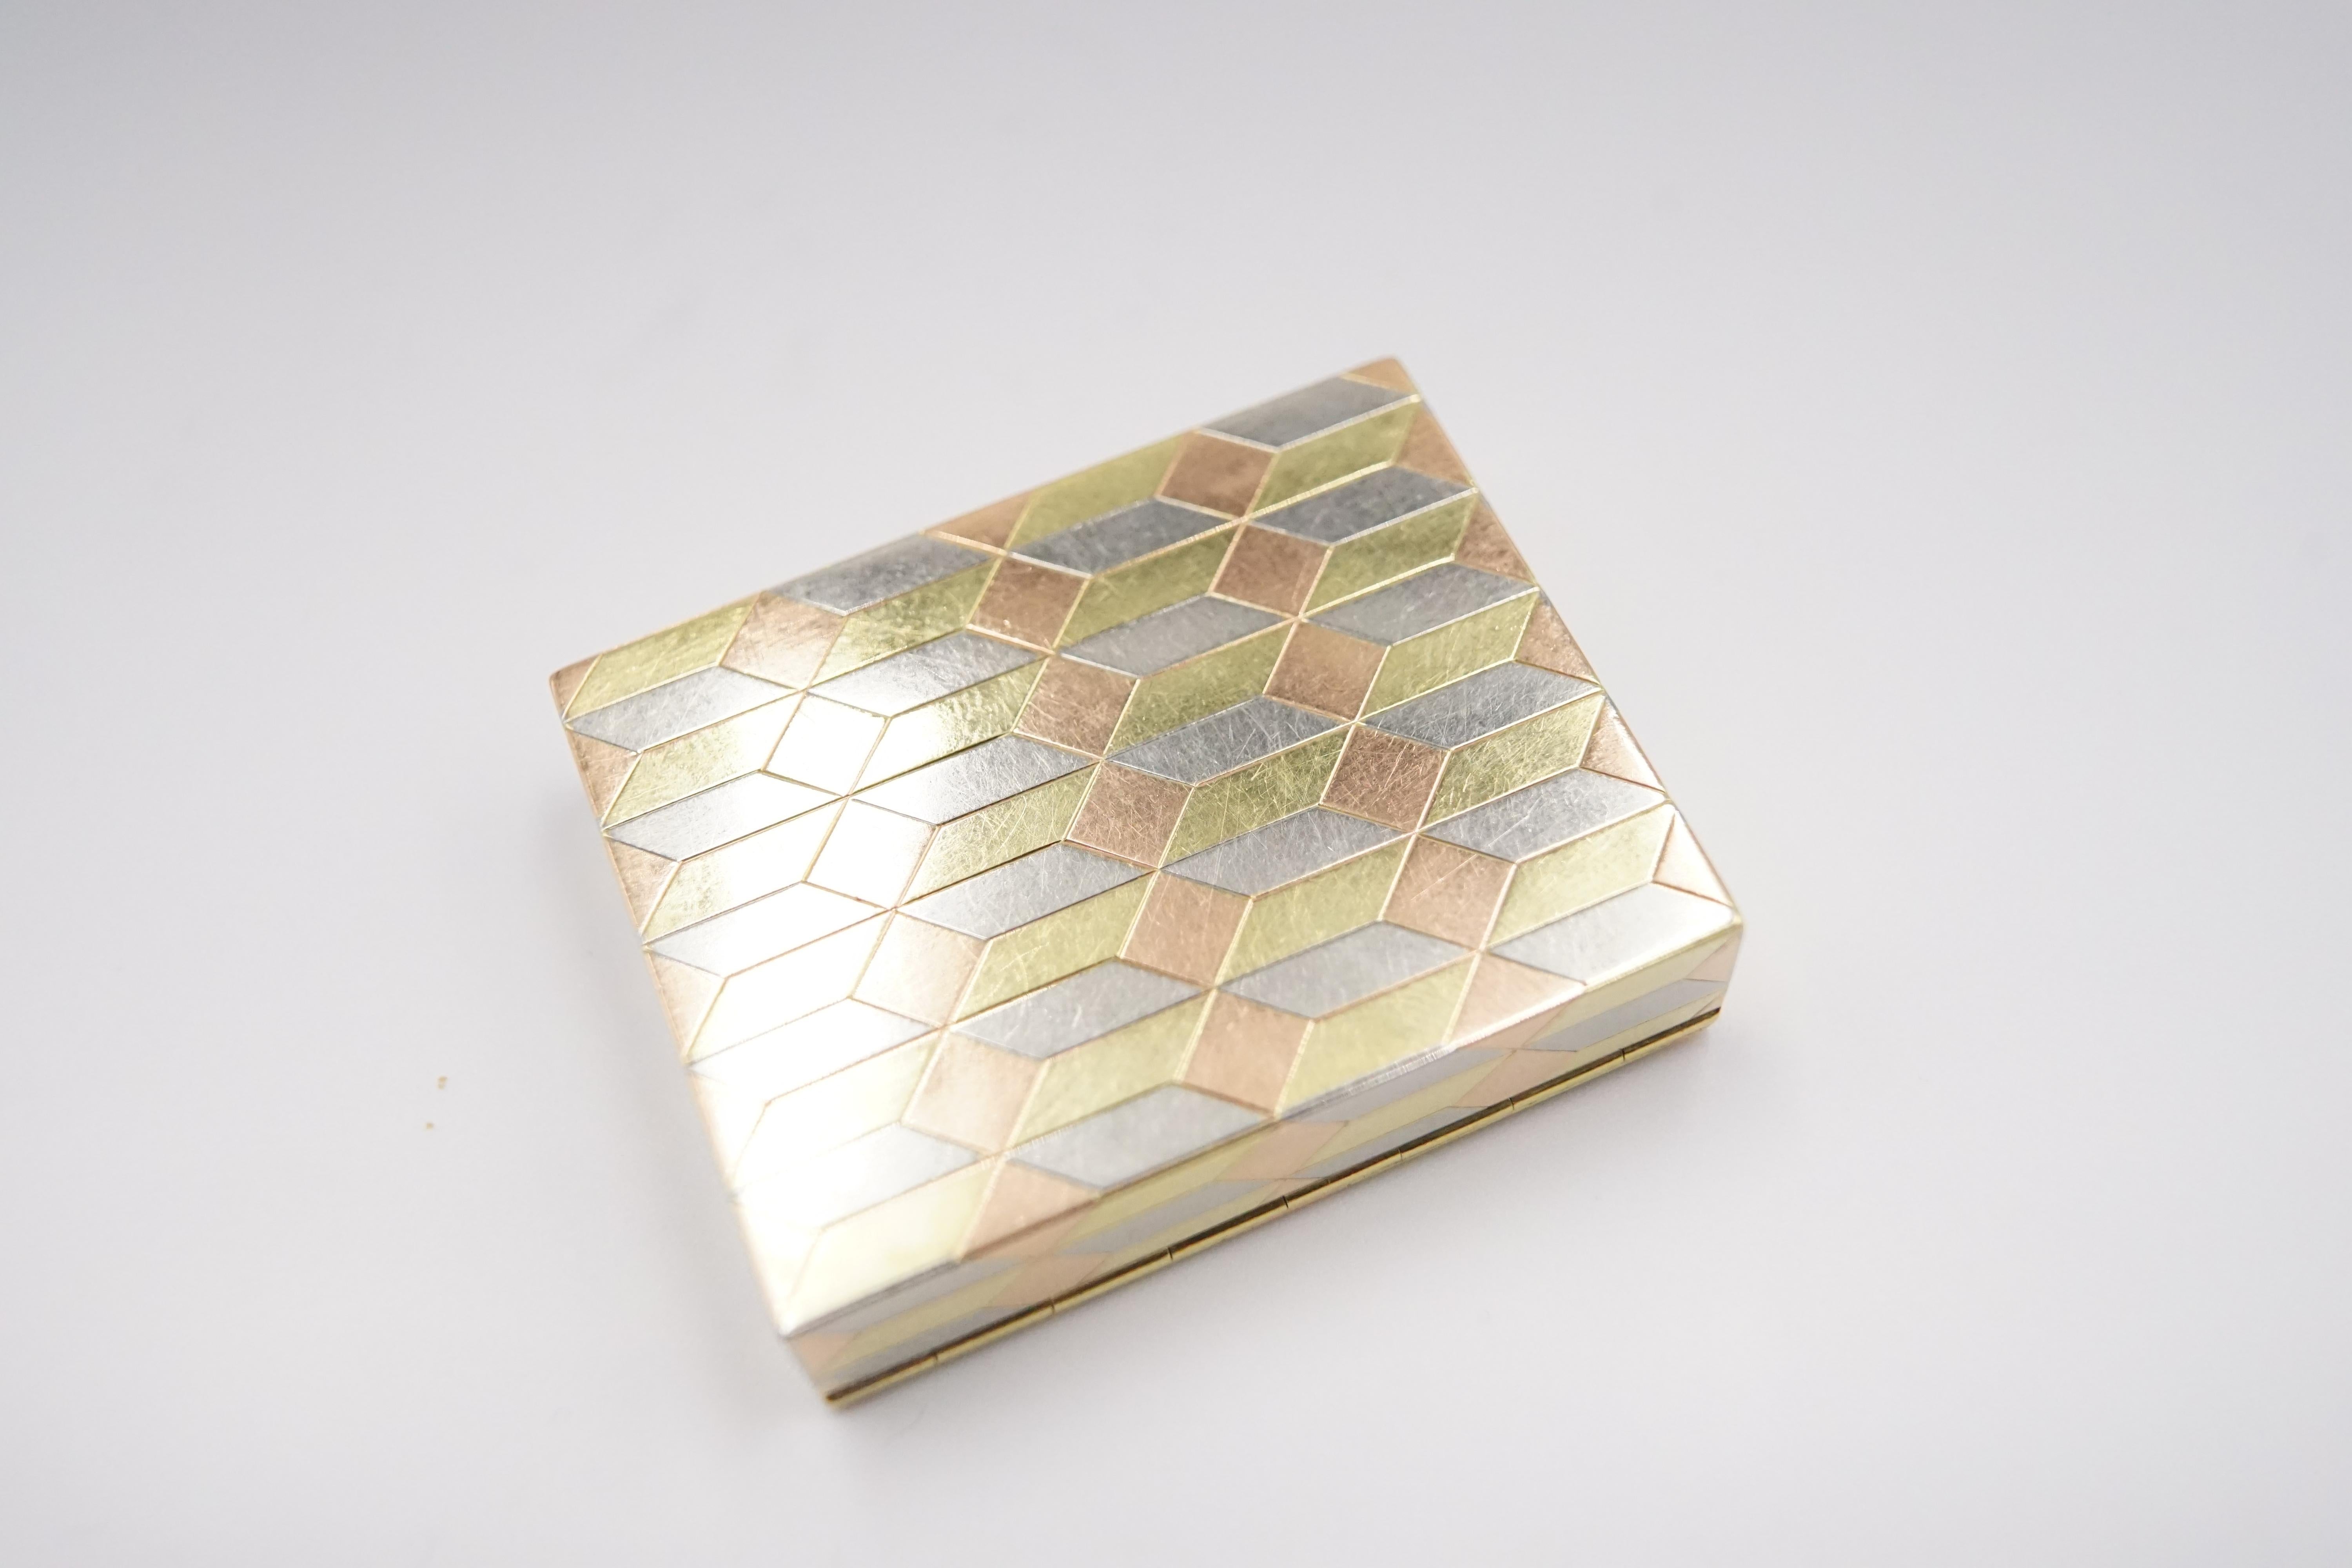 An Art Deco 14ct Tri-Colour Gold Vanity Case by Cartier in original leather pocket.

Cartier used its tri-colour gold for the cuboid geometric pattern throughout the case each colour gold forms a visible face of the cuboid. The craftsmanship of this